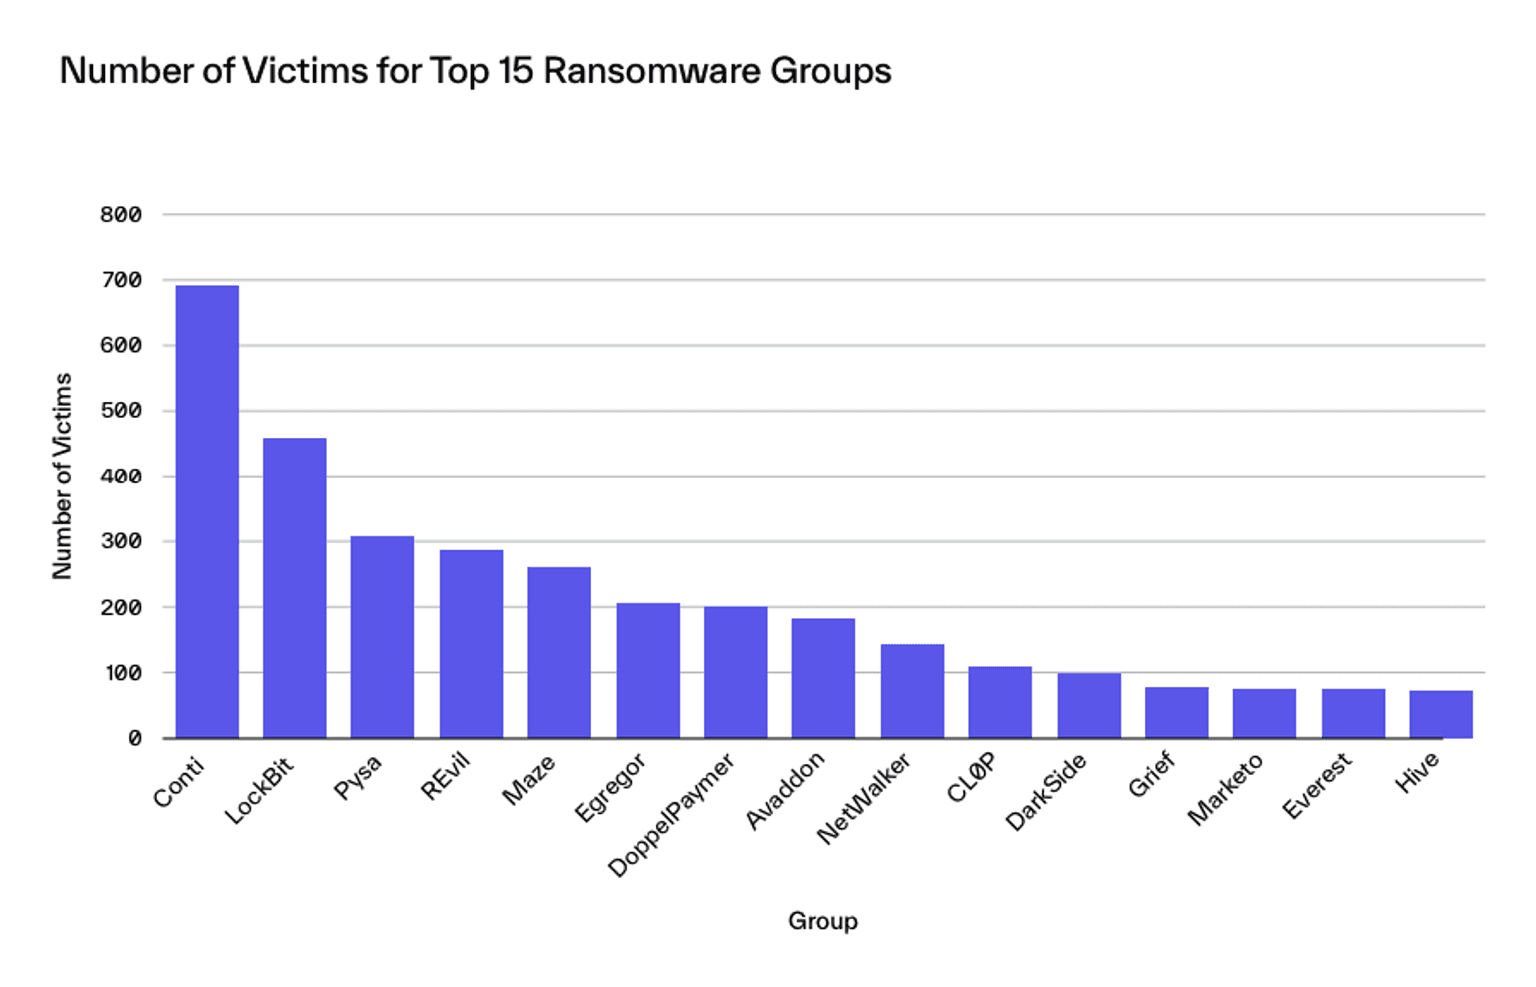 Number of Victims for Top 15 Ransomware Groups